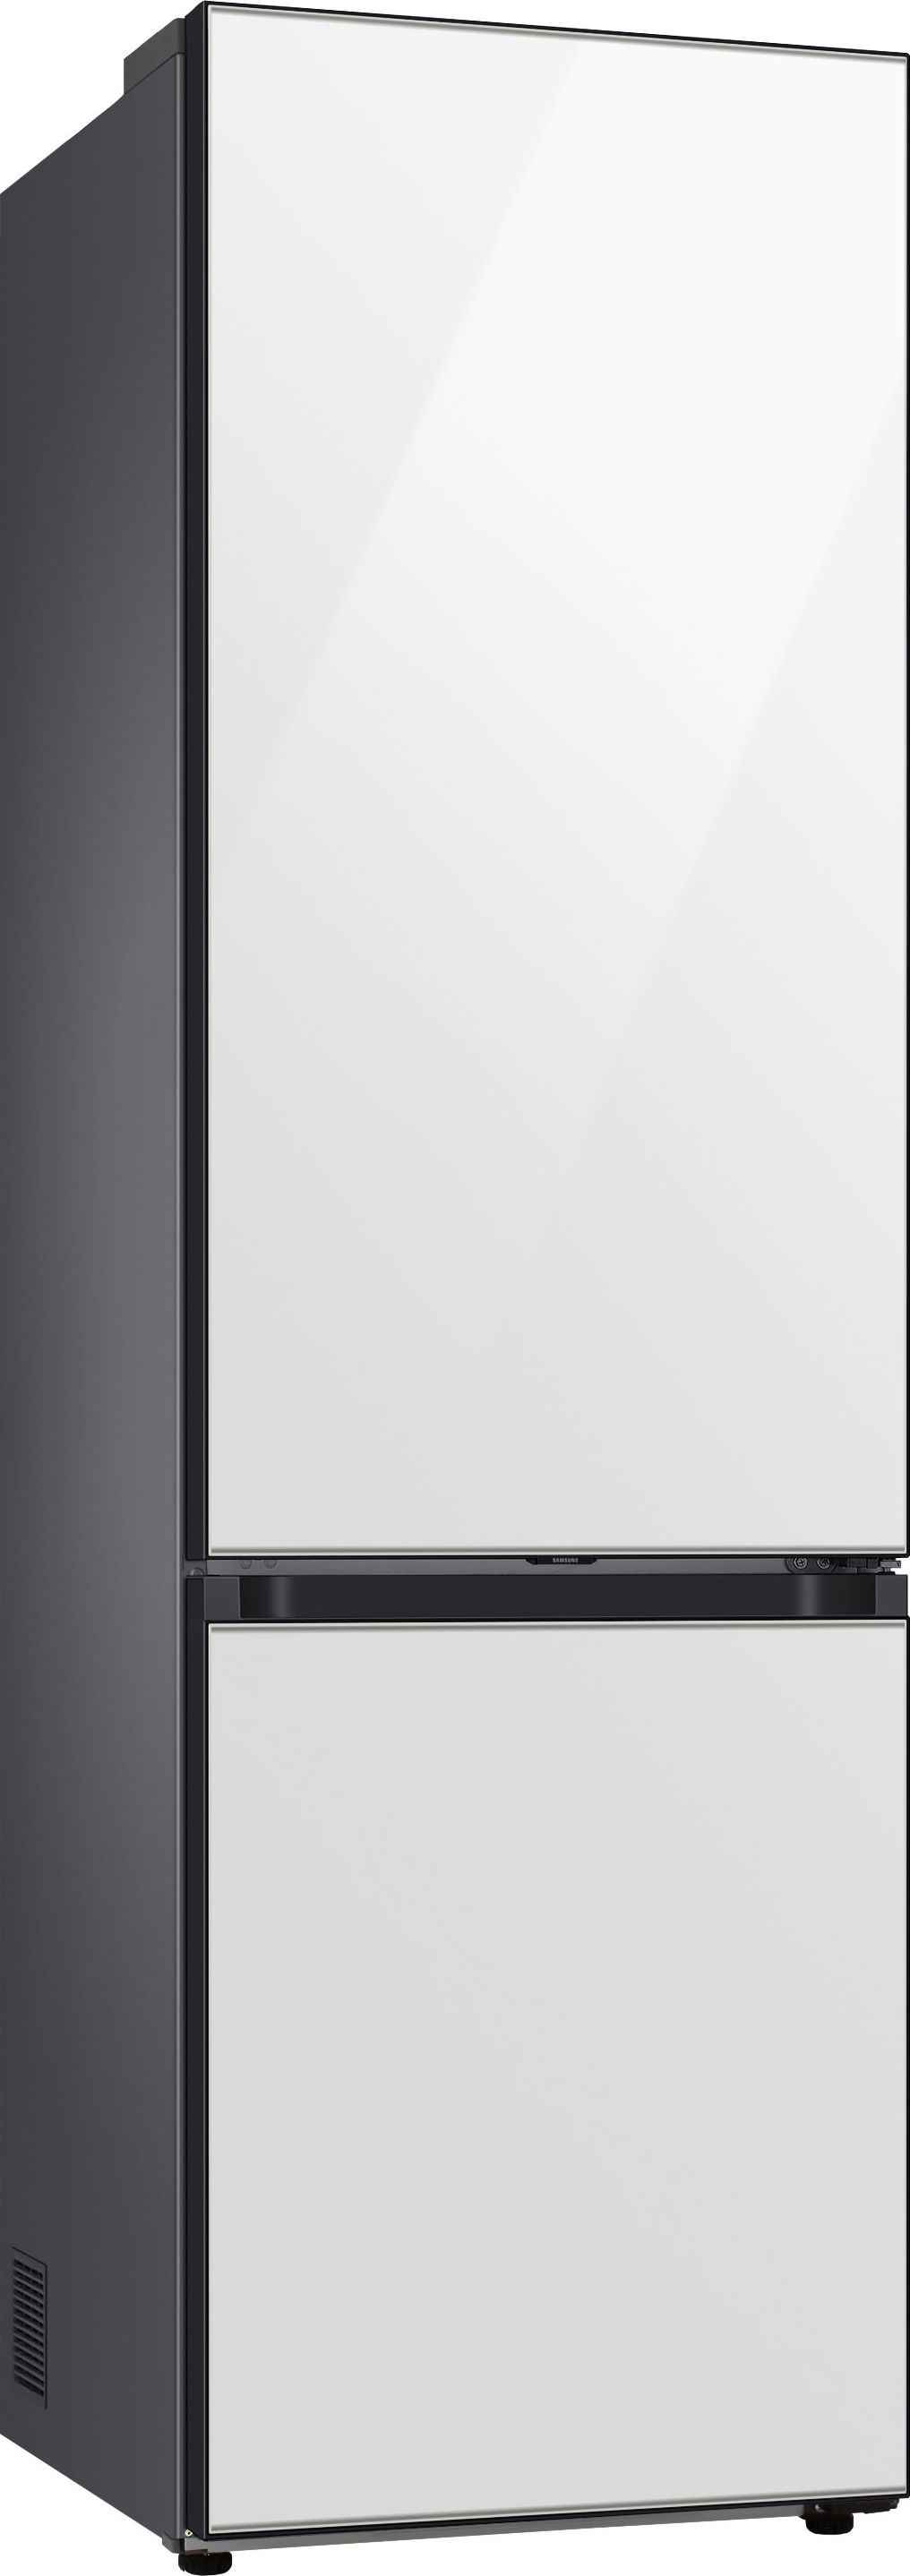 Samsung Bespoke Series 8 RB38C7B5C12 Wifi Connected 70/30 No Frost Fridge Freezer - Clean White - C Rated, White